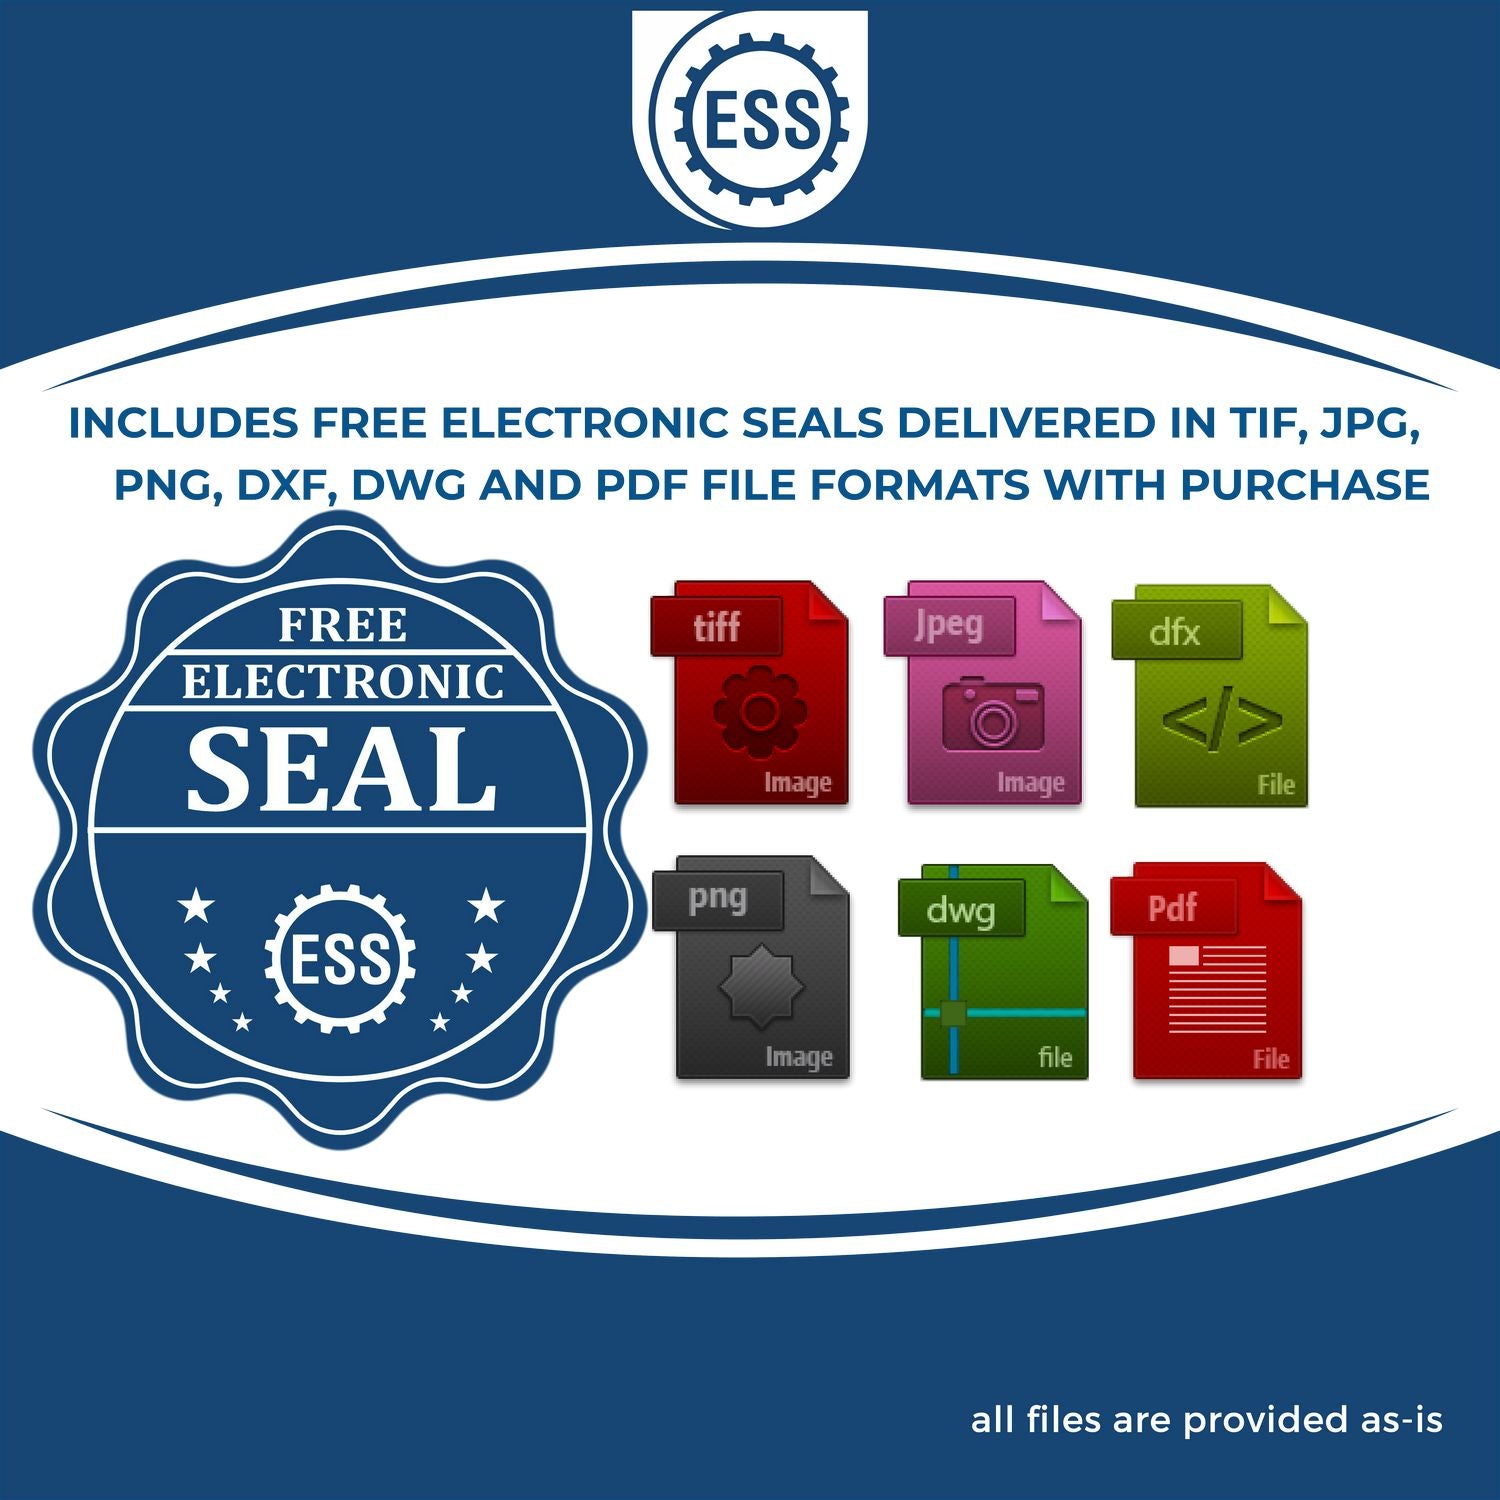 An infographic for the free electronic seal for the Long Reach Puerto Rico PE Seal illustrating the different file type icons such as DXF, DWG, TIF, JPG and PNG.